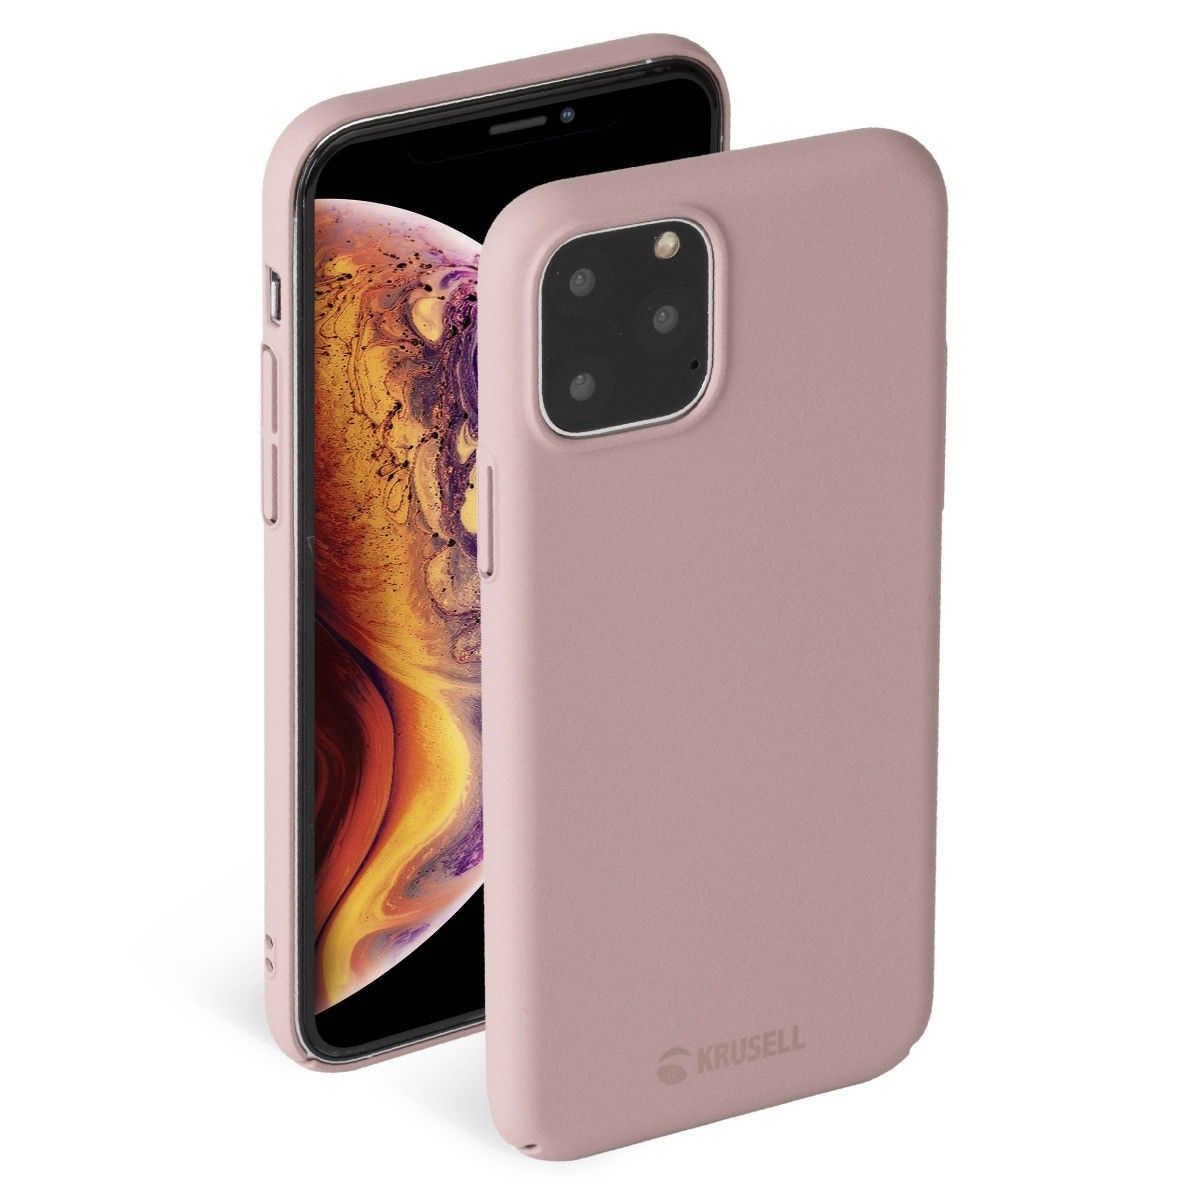 Krusell Sandby Cover Apple iPhone 11 Pro Max - Pink